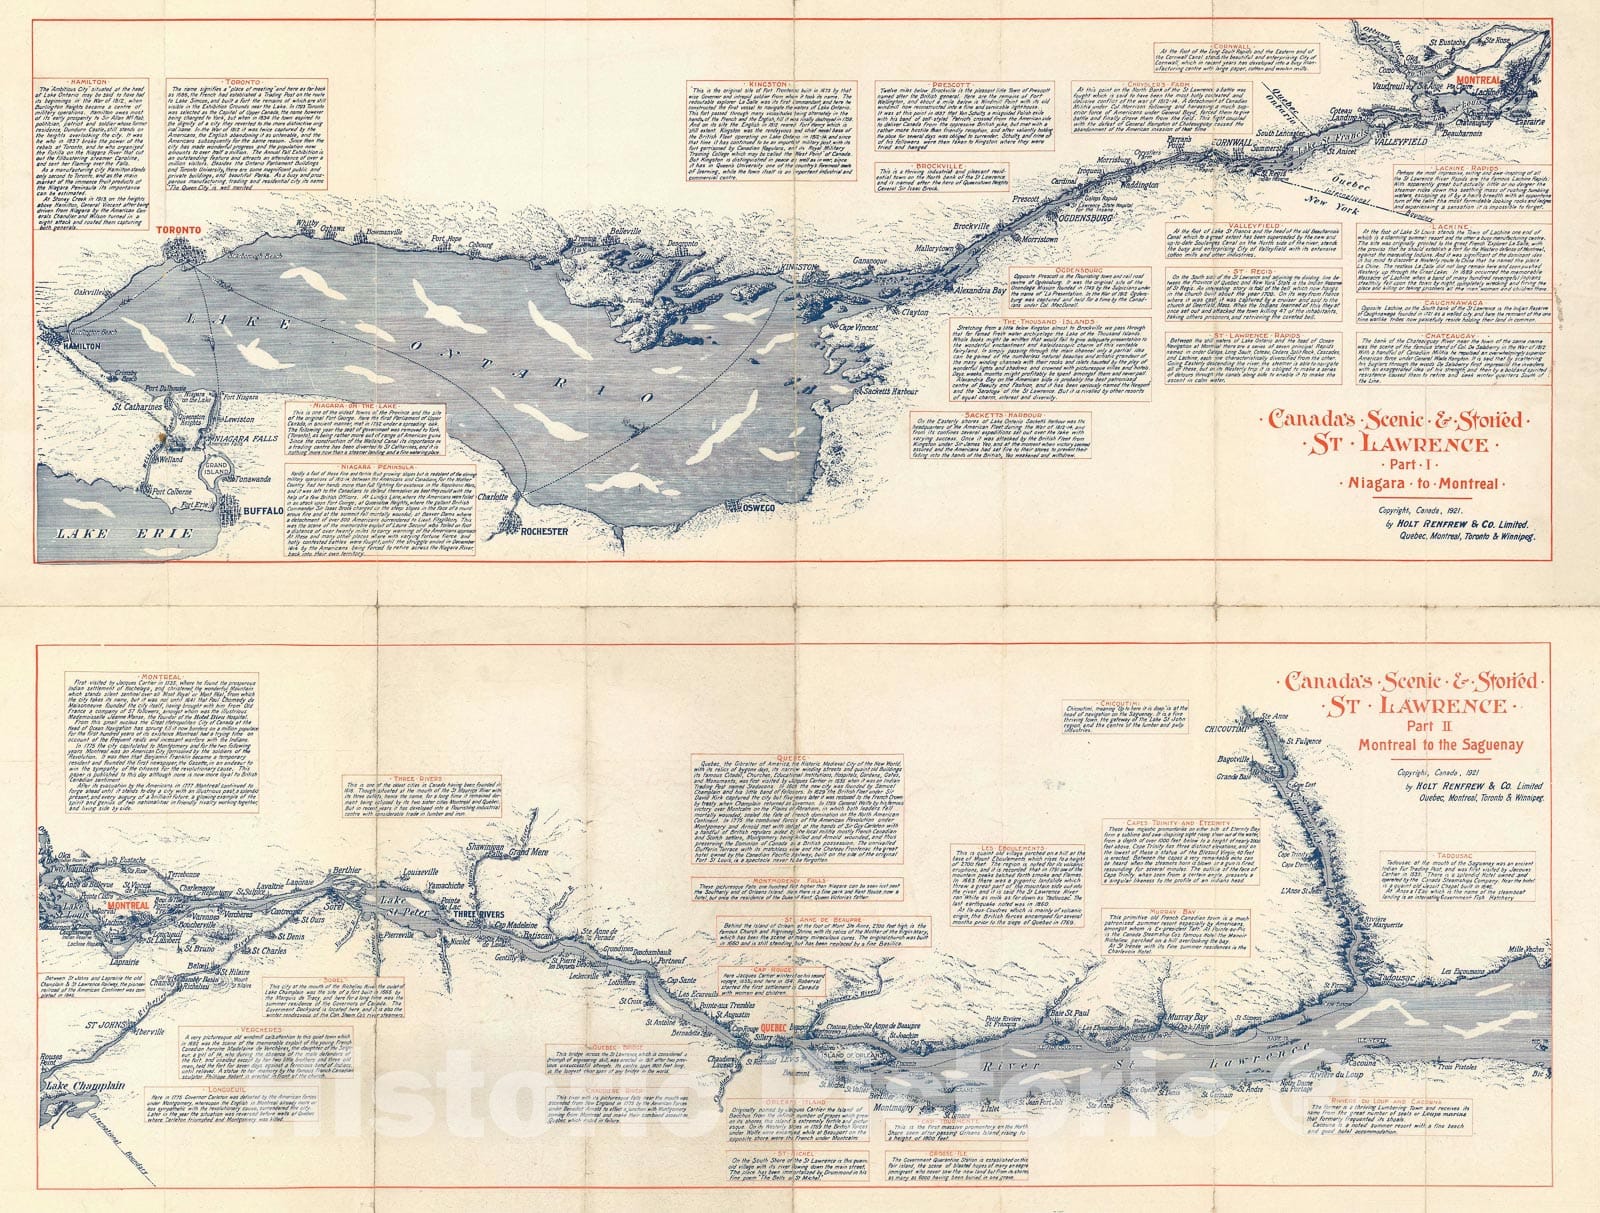 Historic Map : The St. Lawrence River, Canada, Holt, Renfrew, 1921, Vintage Wall Art